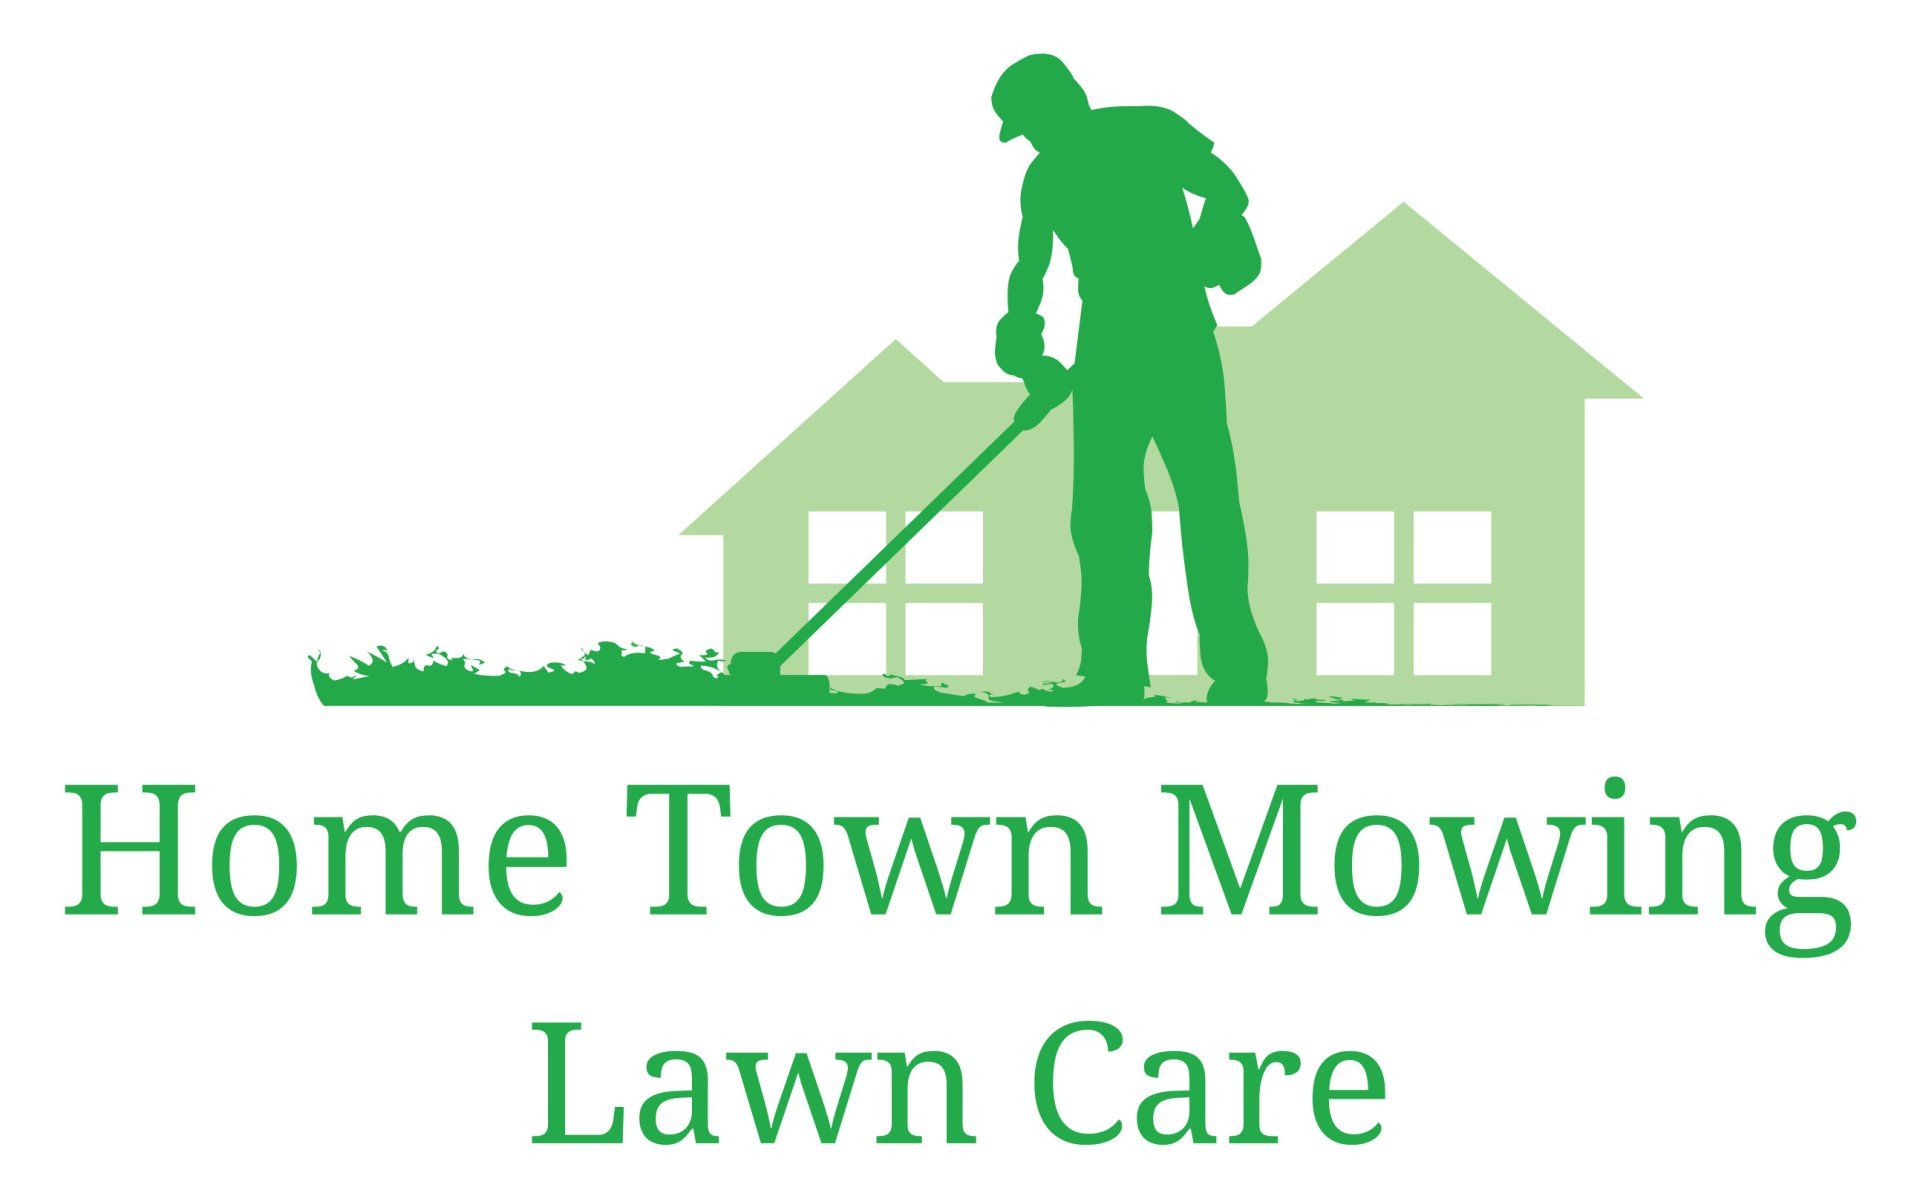 Home Town Mowing LLC